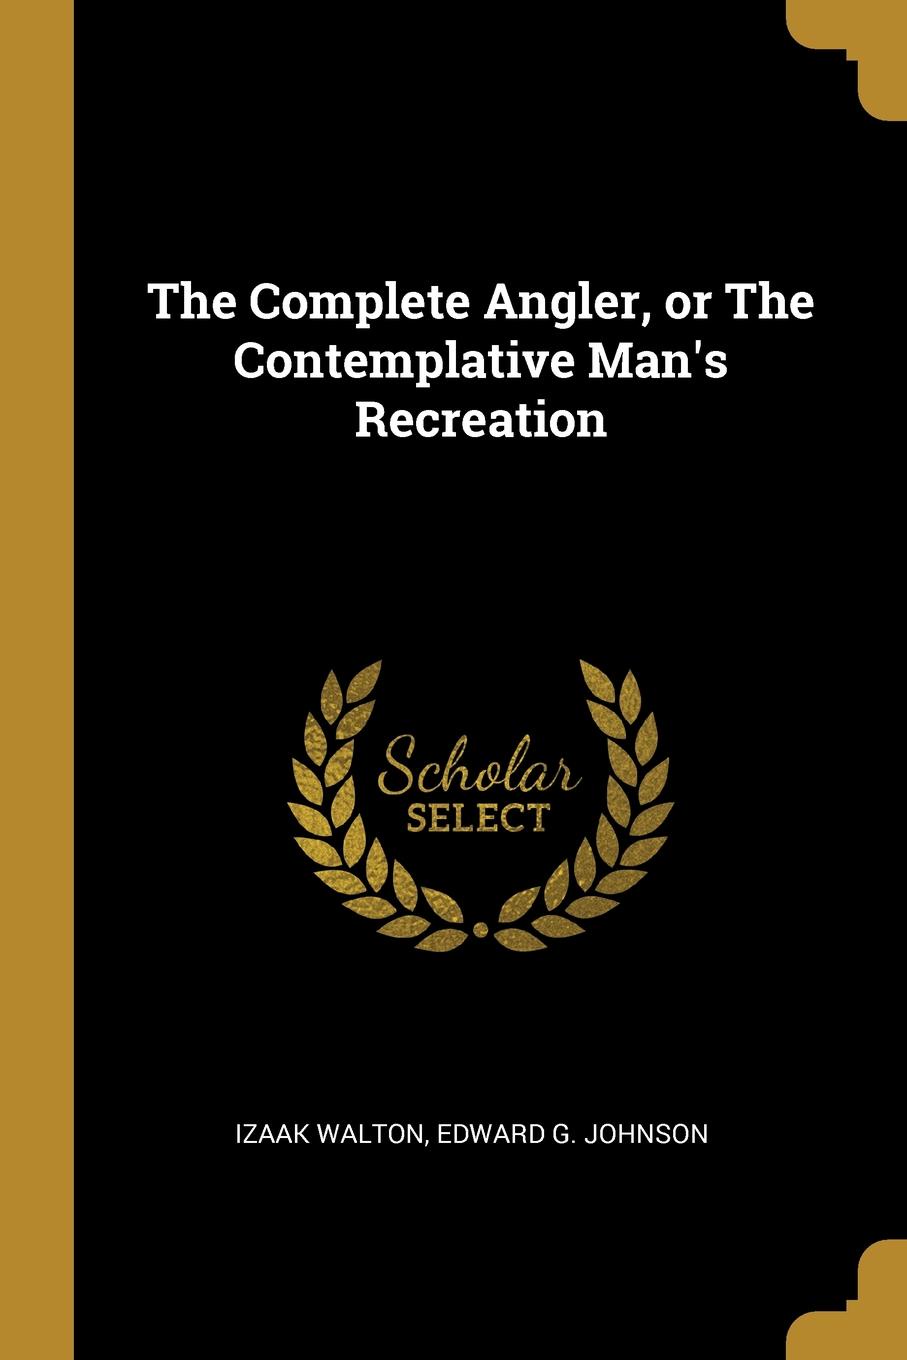 The Complete Angler, or The Contemplative Man.s Recreation